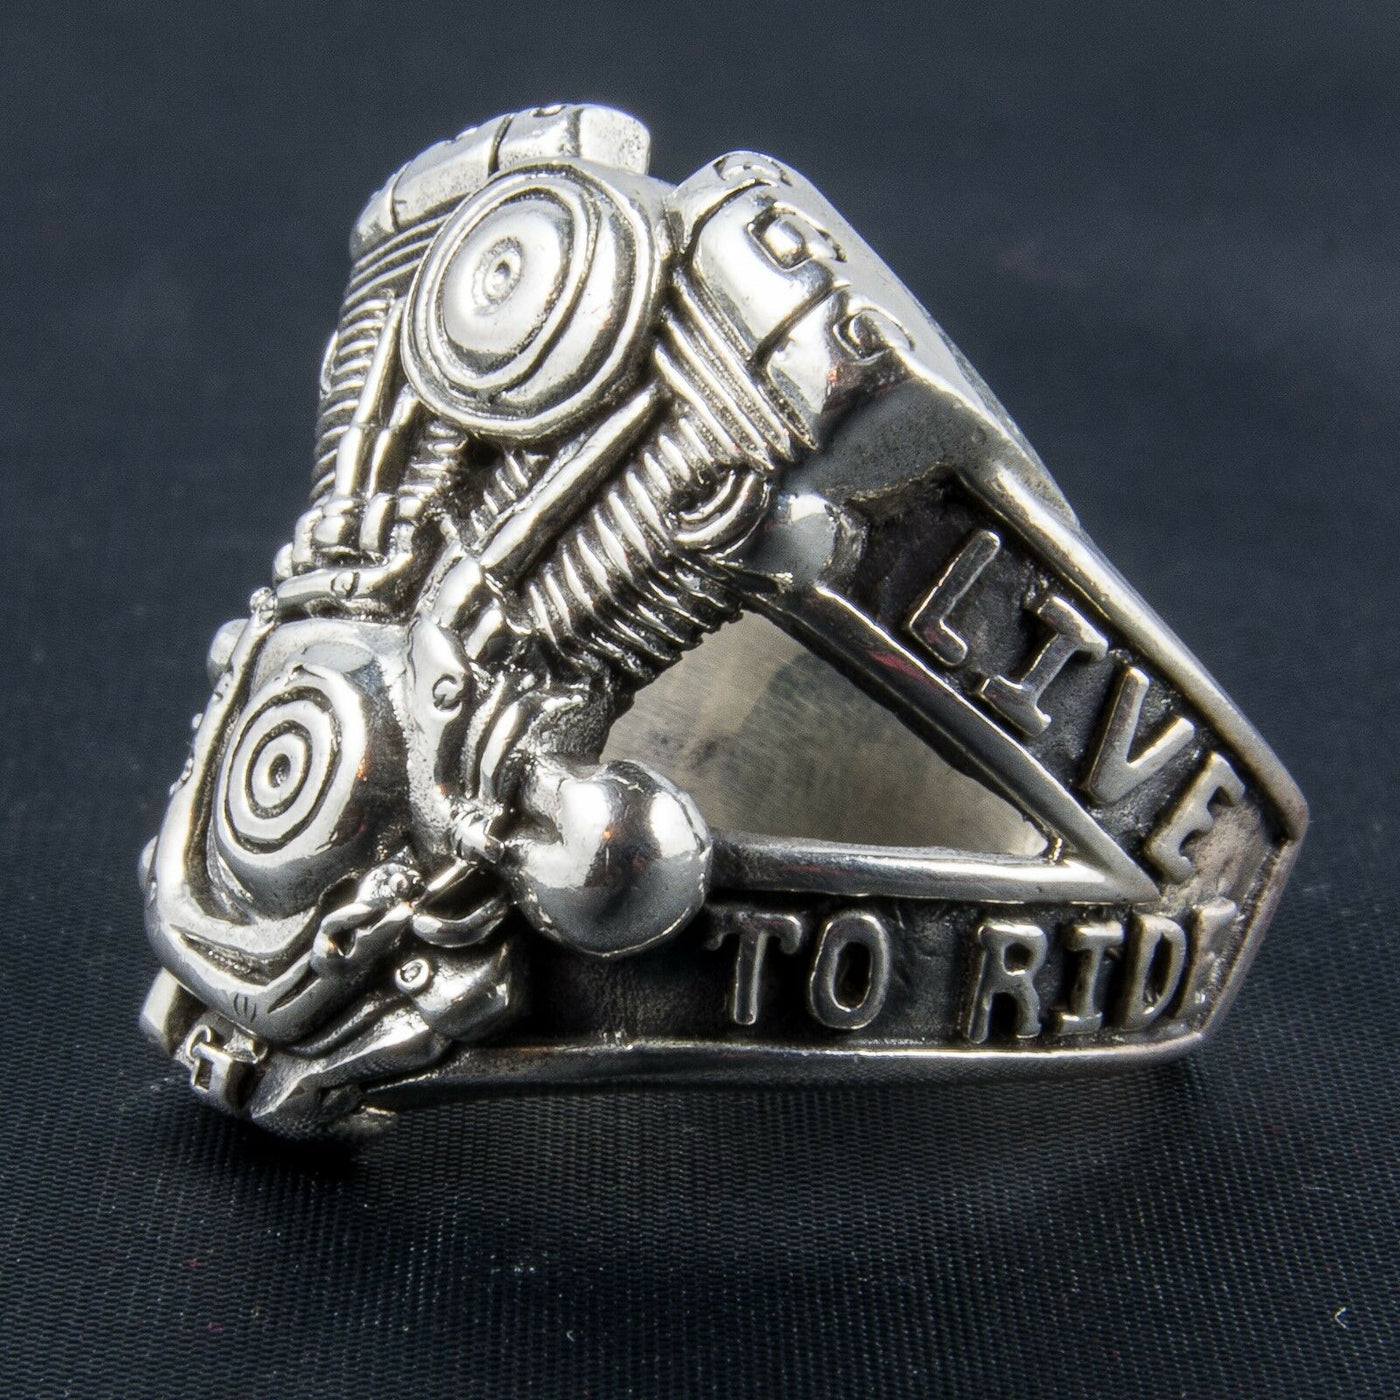 Engine Block Live to Ride Ring .925 sterling silver Sizes M-Z